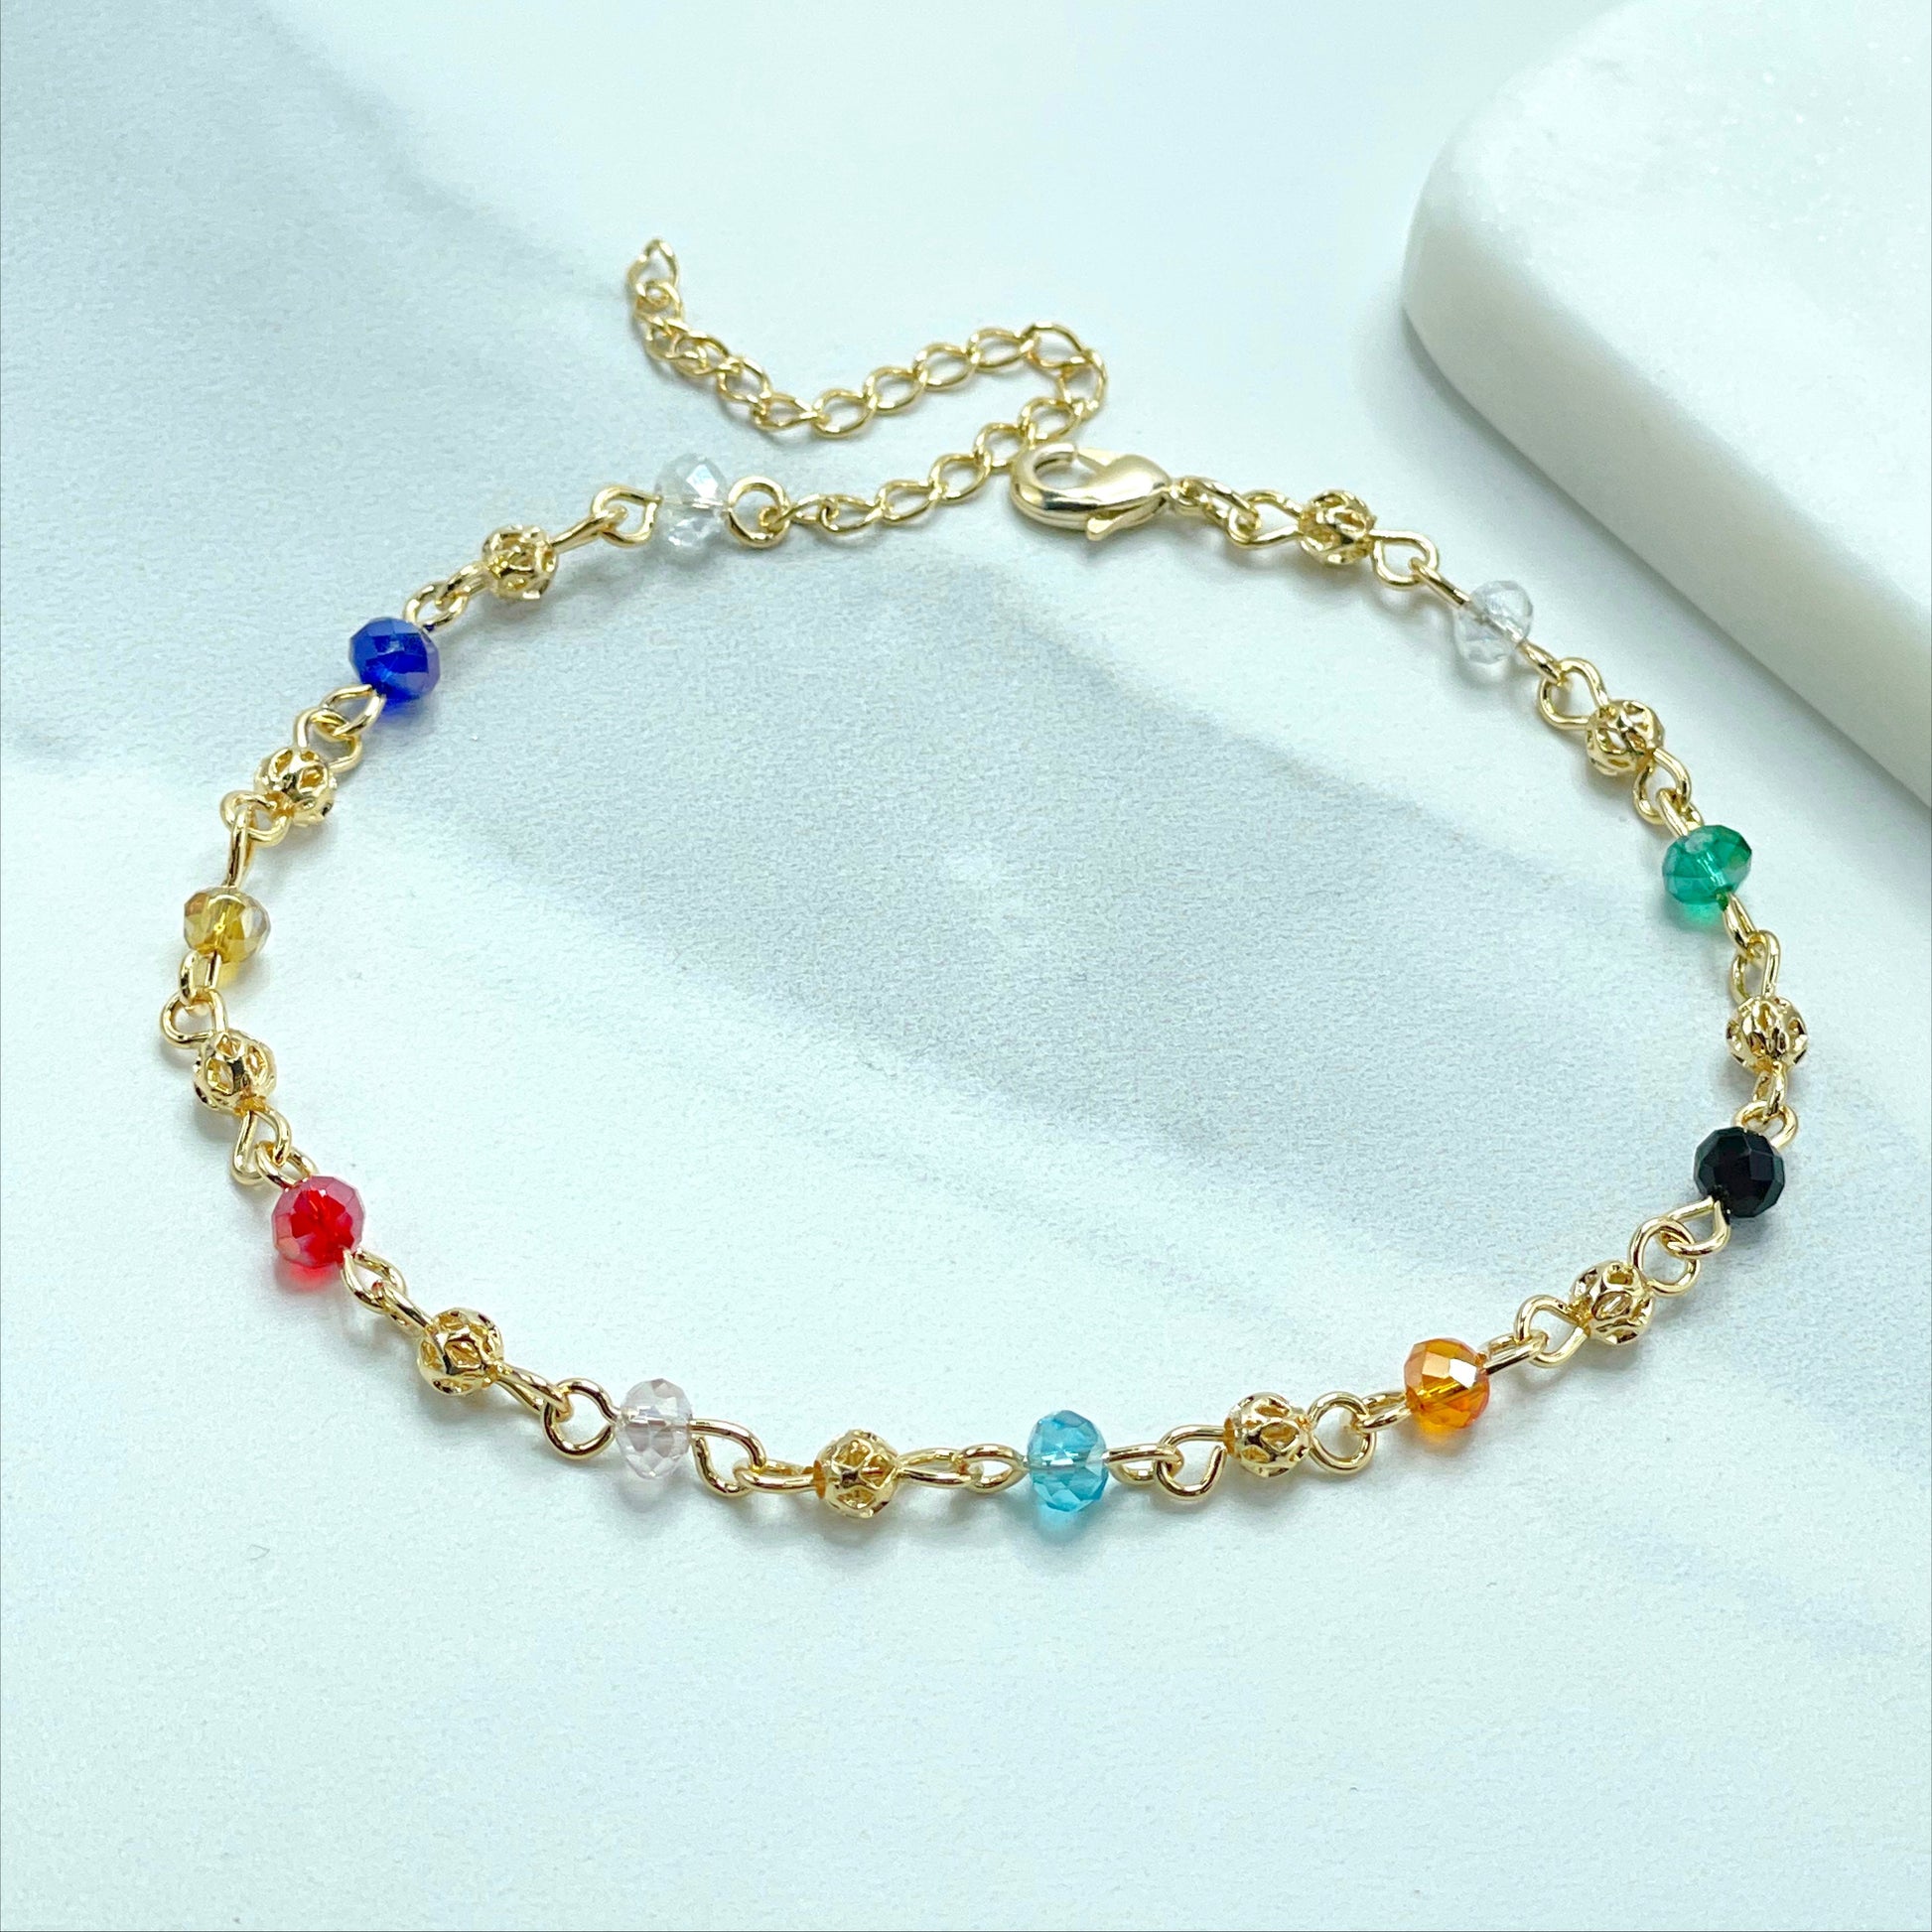 18k Gold Filled 3mm Colored Acrylic and Gold Beads Linked Bracelet with extender, Wholesale Jewelry Making Supplies